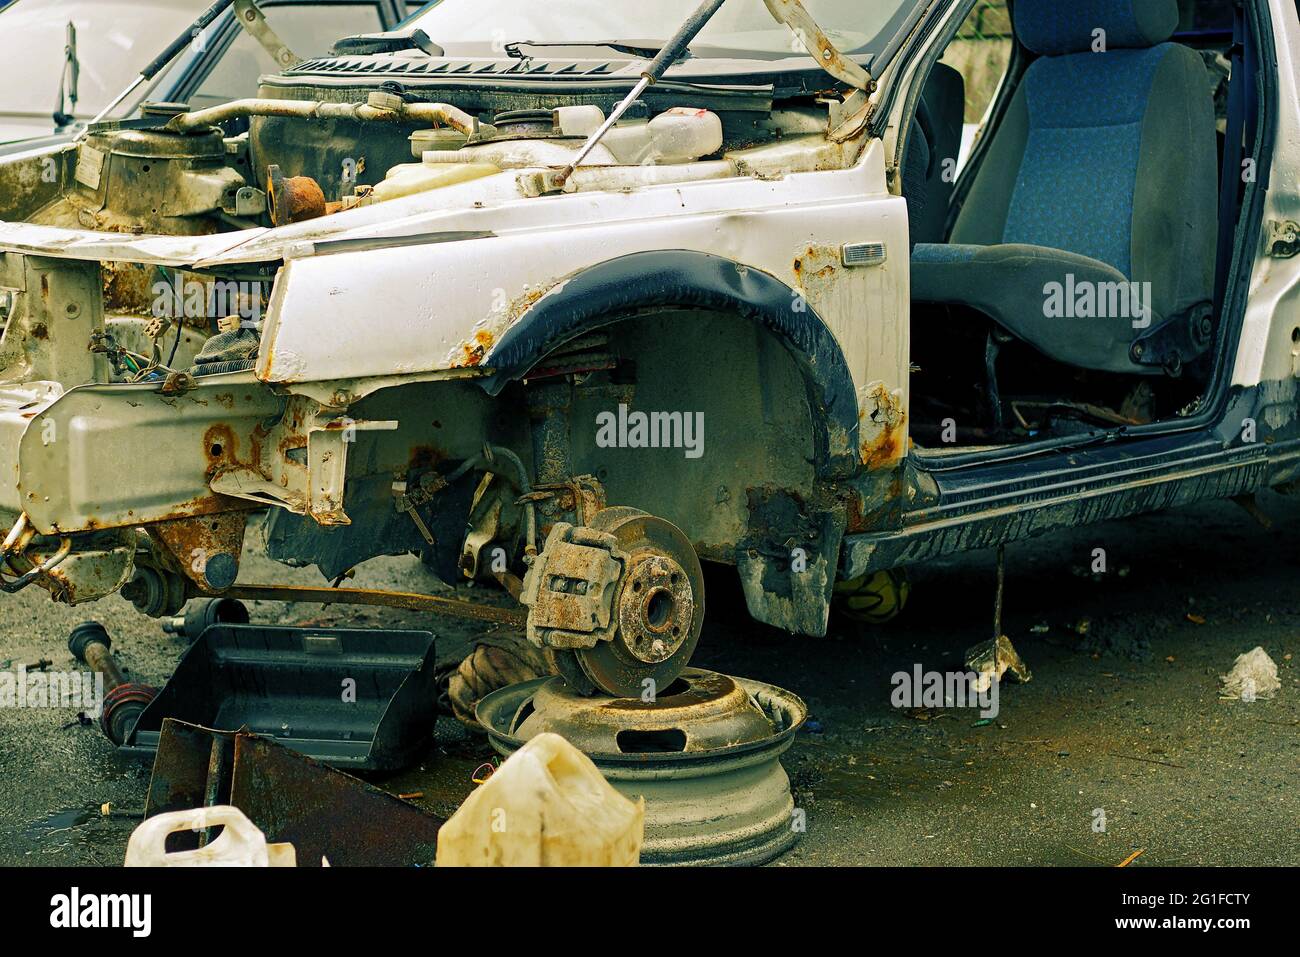 body of old car dismantled for spare parts, color graded Stock Photo